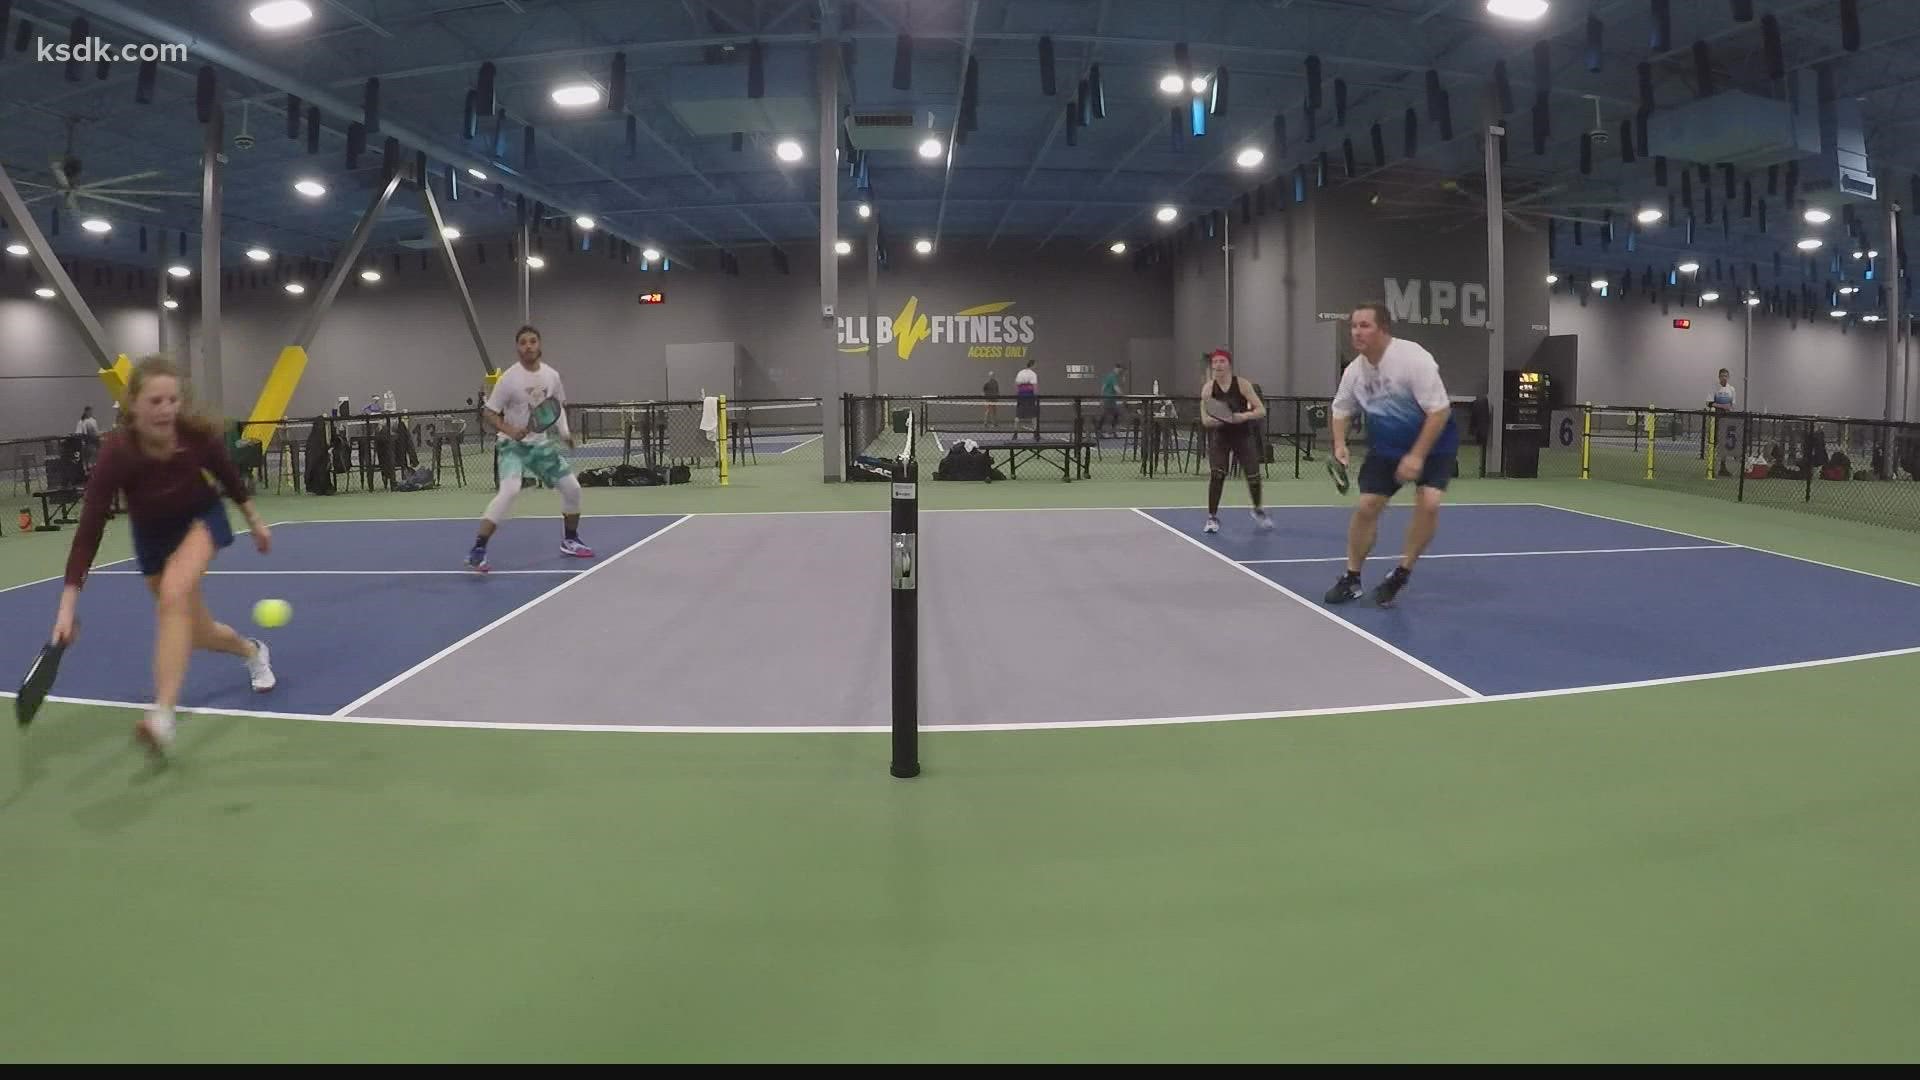 People from 8 to 80 are coming out to try pickleball. In the St. Louis area, there are about 30,000 players that play on hundreds of courts.